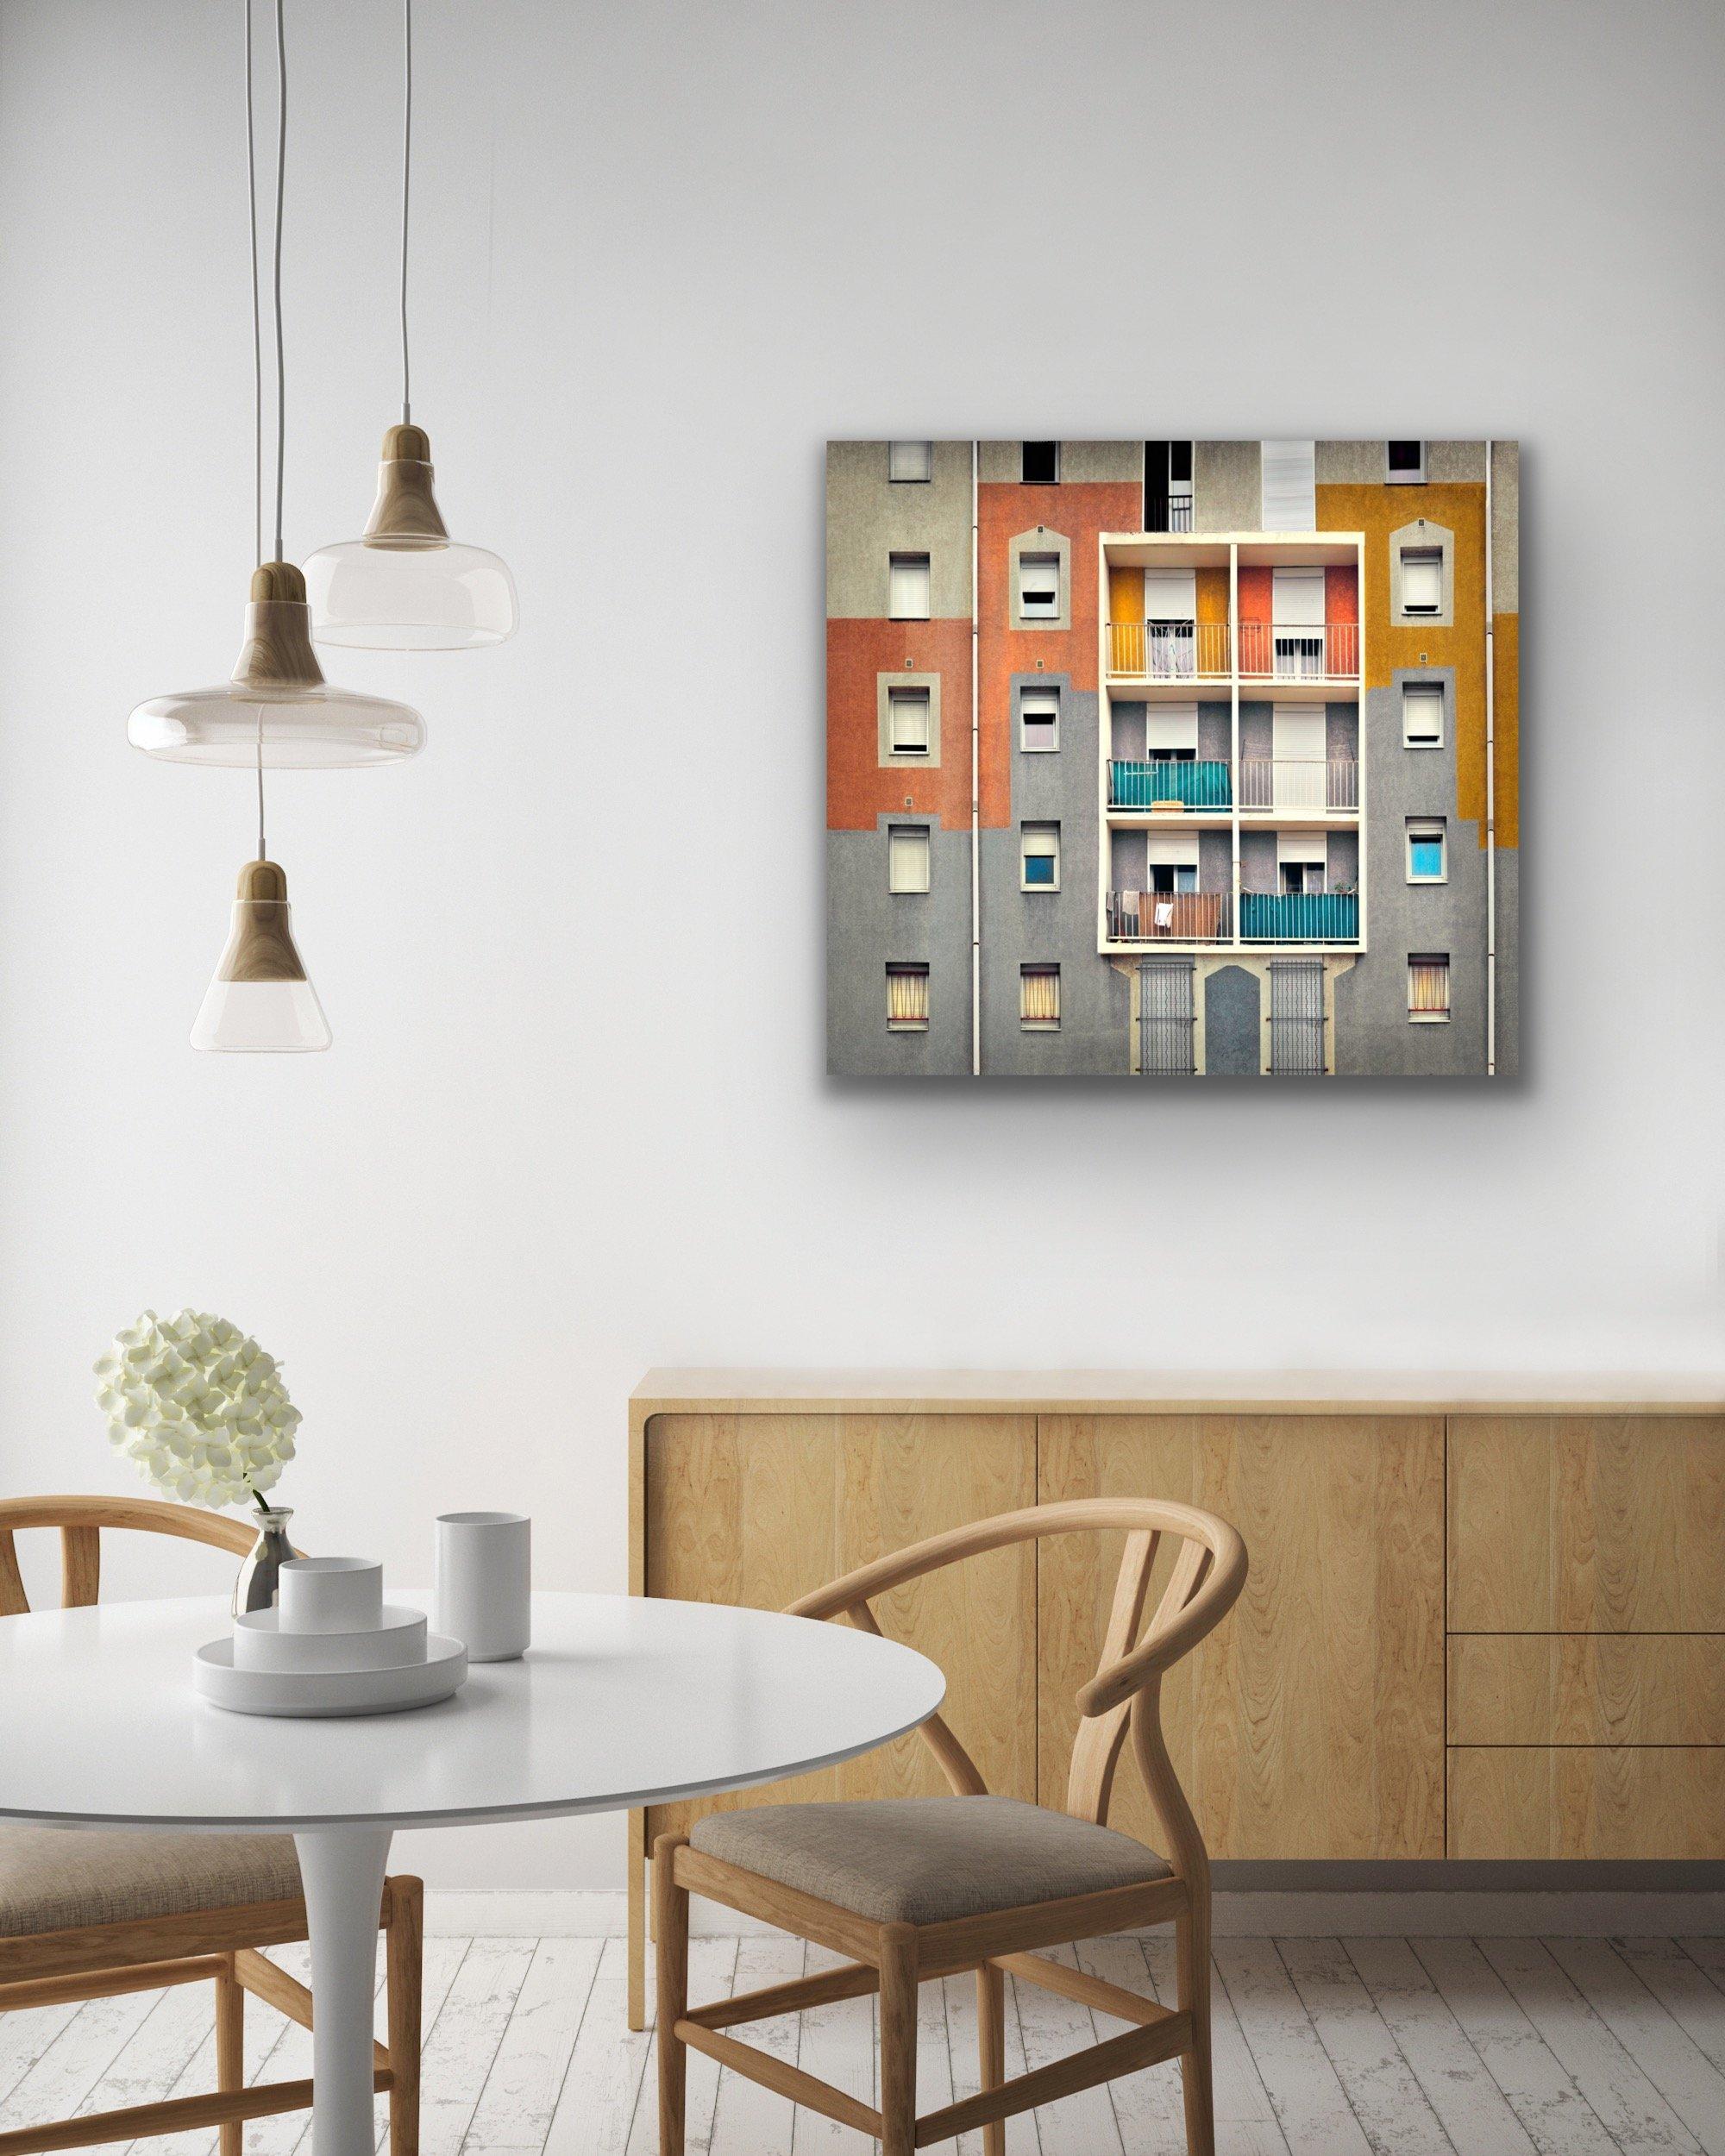 23 Flats by Barry Cawston 120x110cm C-type Photographic Print Only For Sale 1